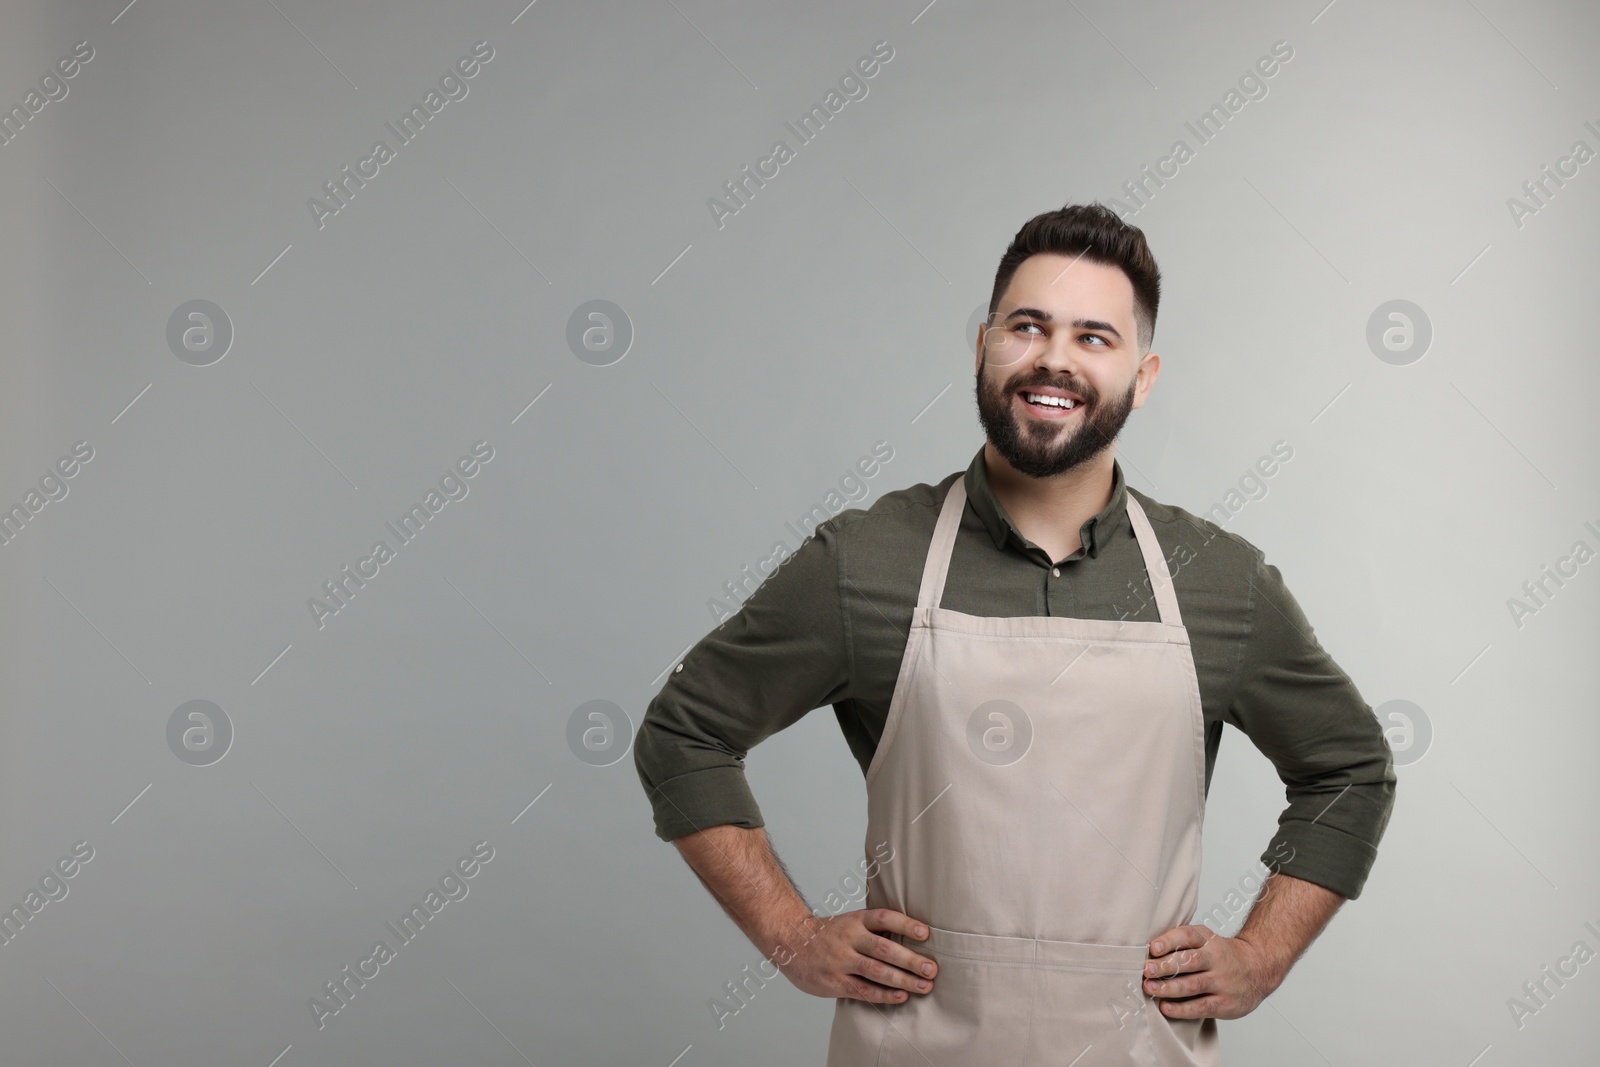 Photo of Smiling man in kitchen apron on grey background. Mockup for design